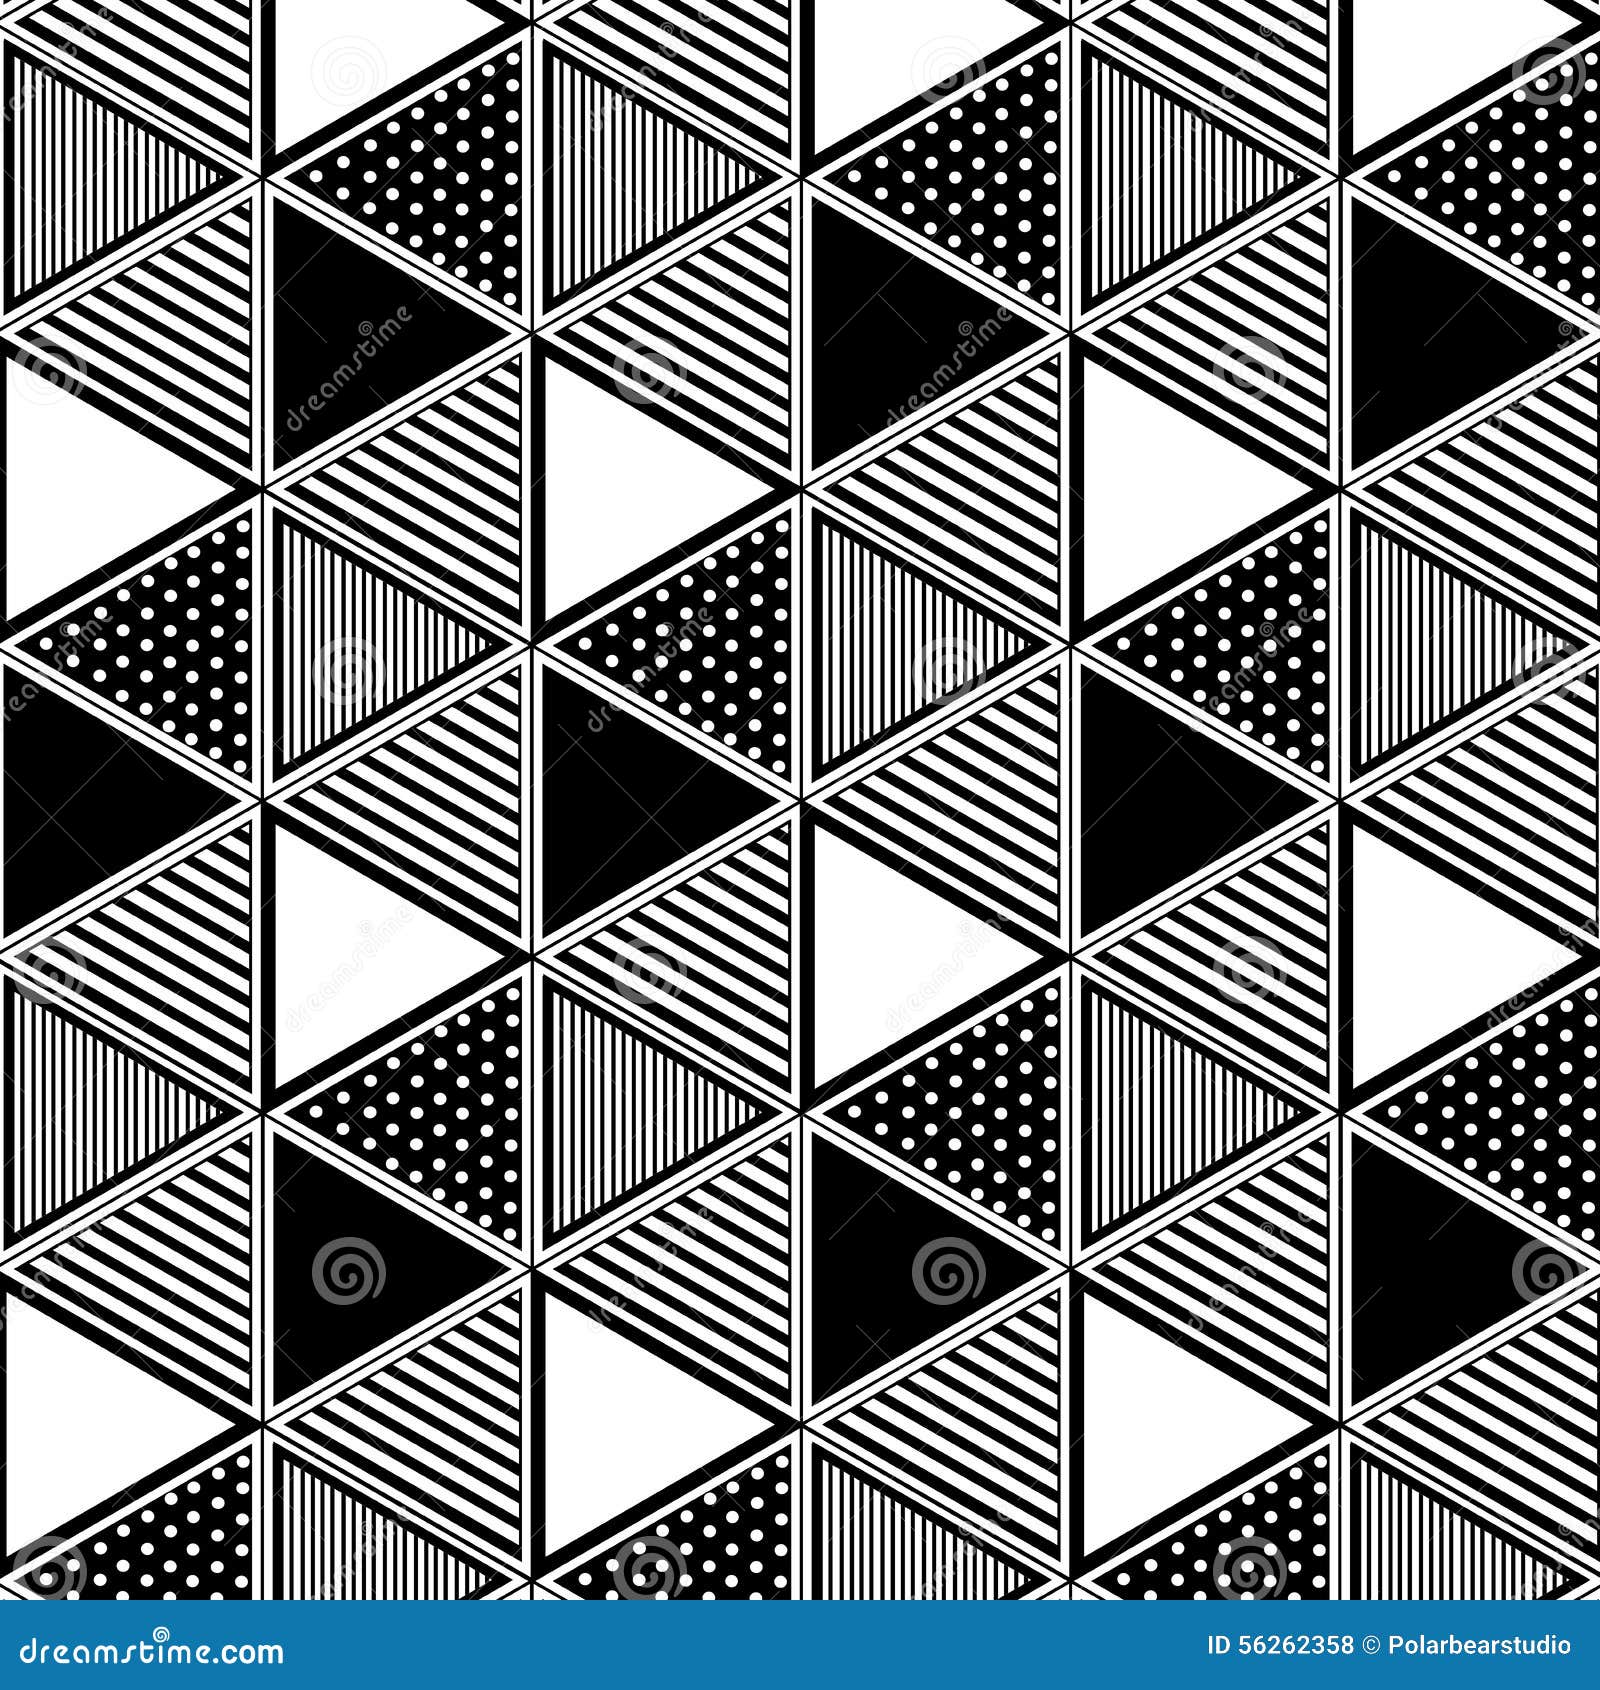 Triangle Pattern Seamless Mixed Stock Vector - Illustration of pattern ...